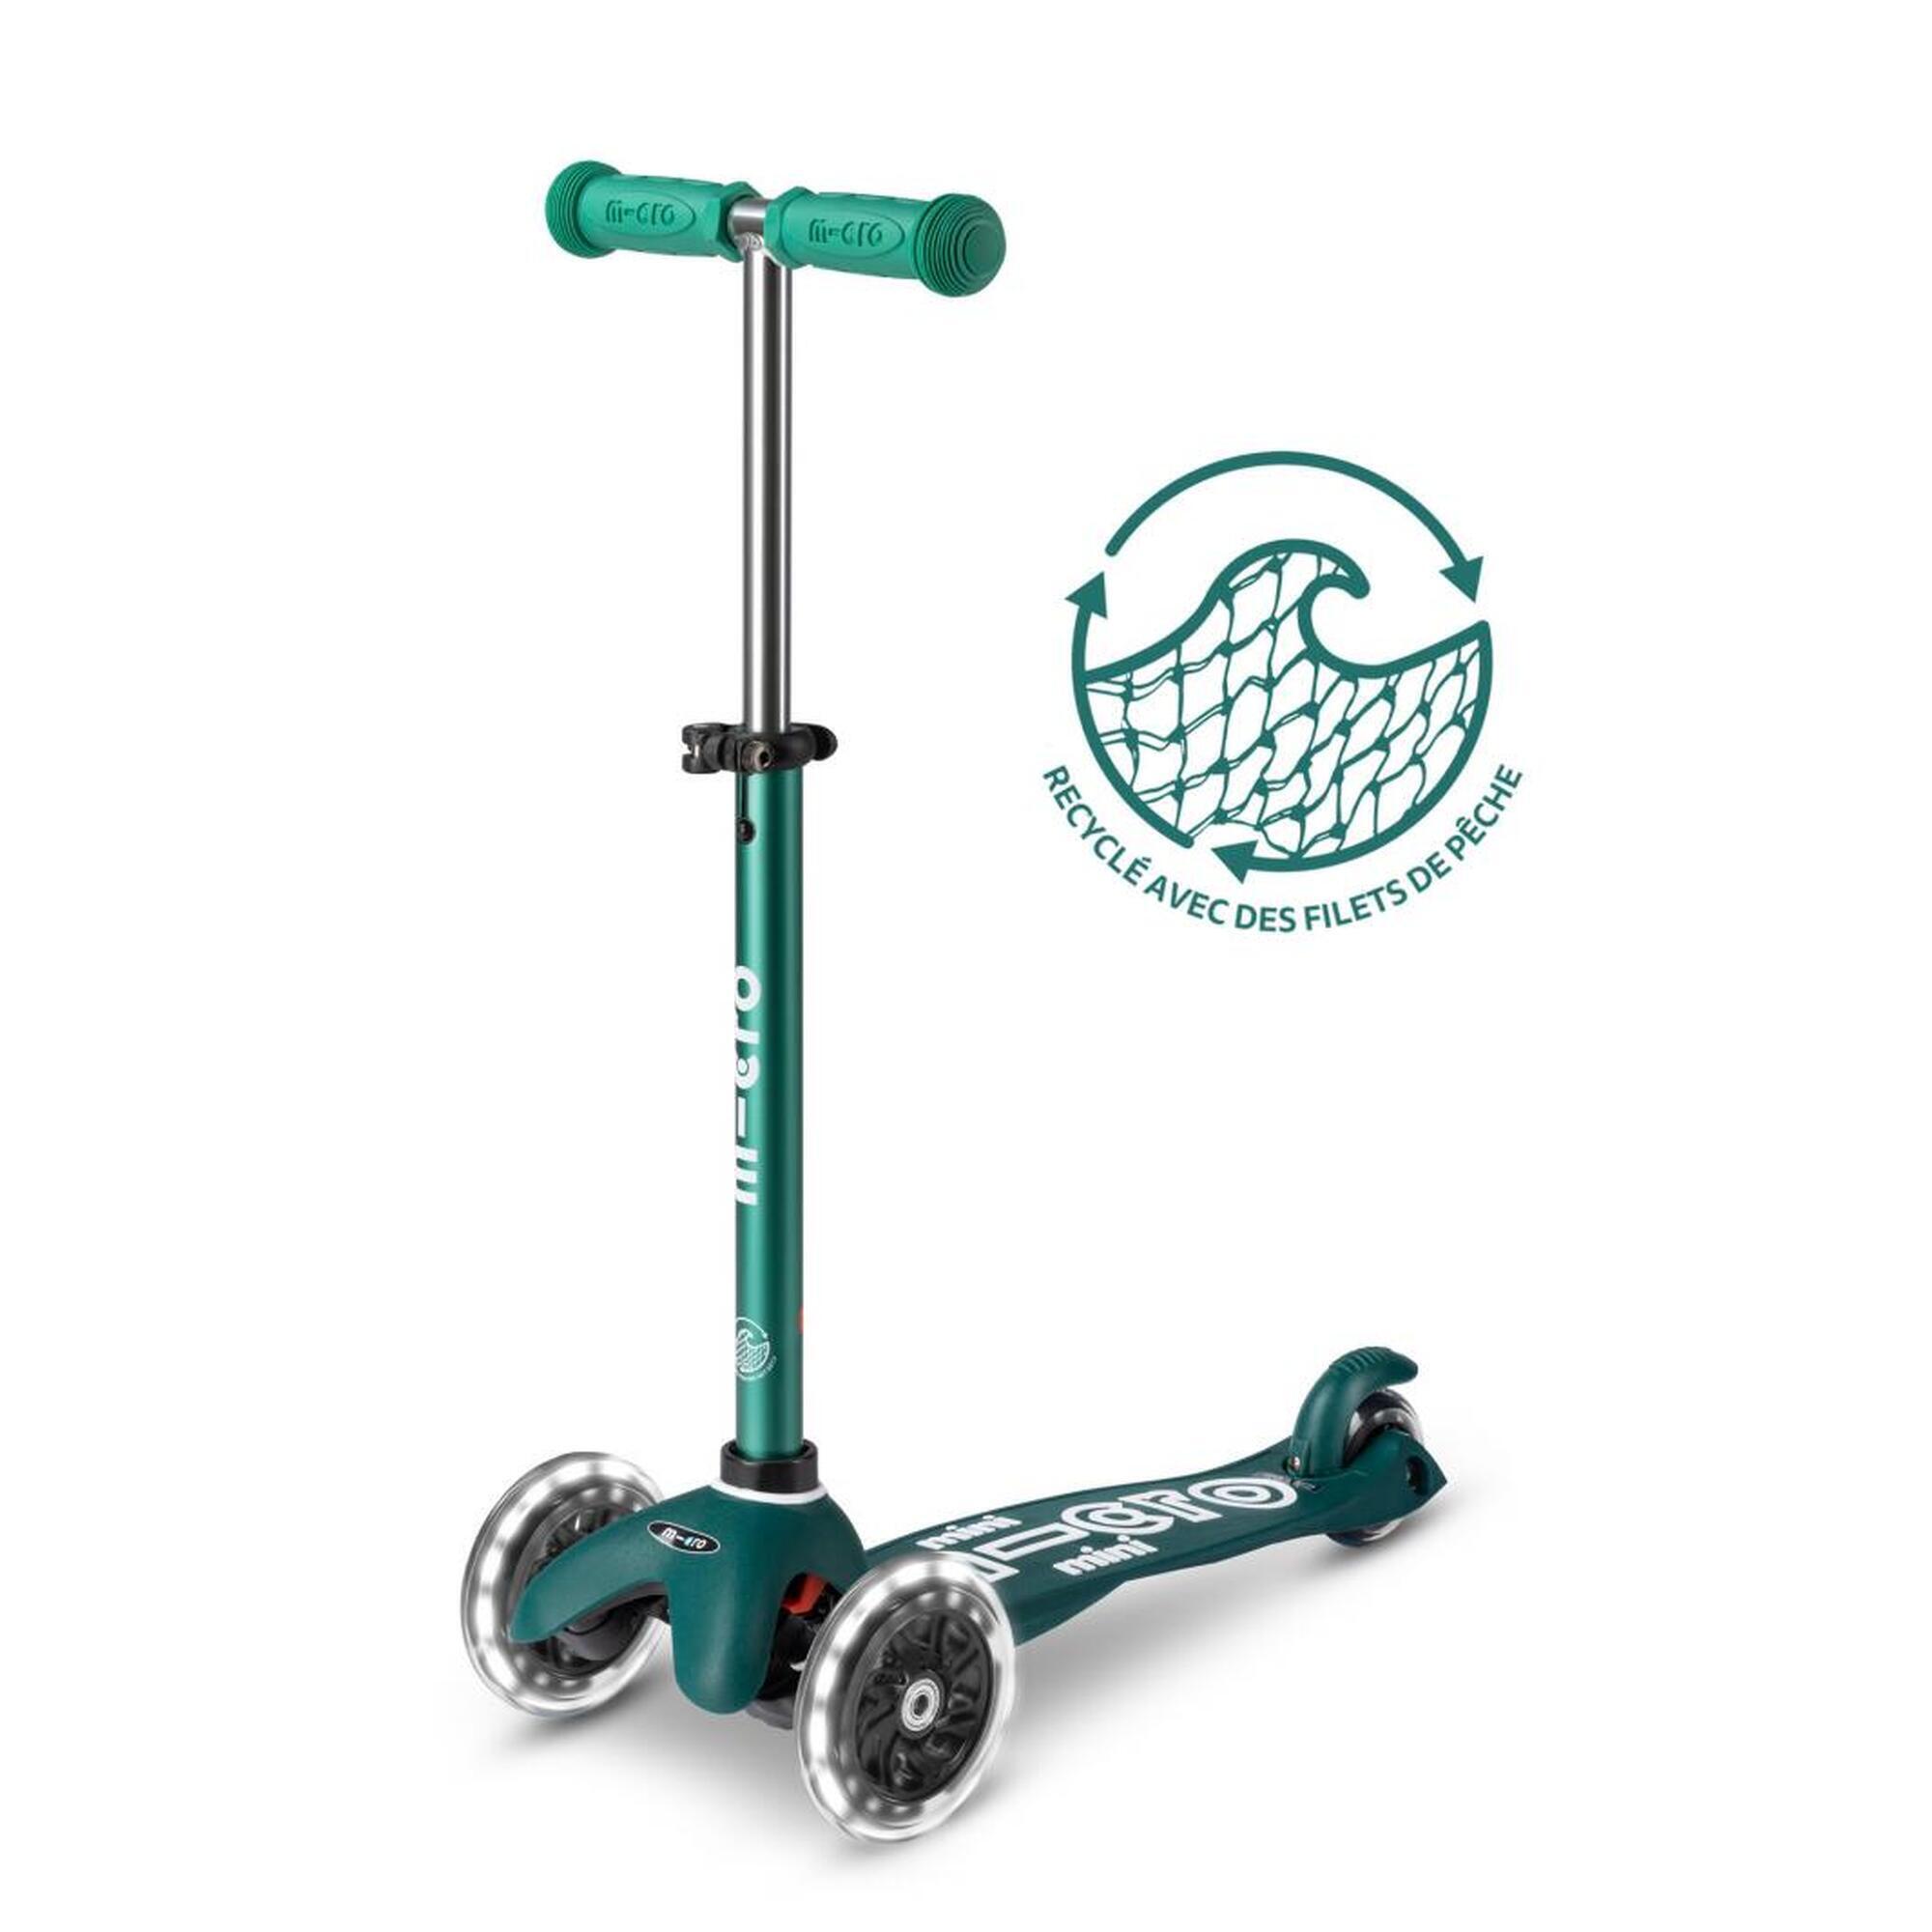 MICRO Mini Scooter - Light up Wheels & Recycled Deck: Green